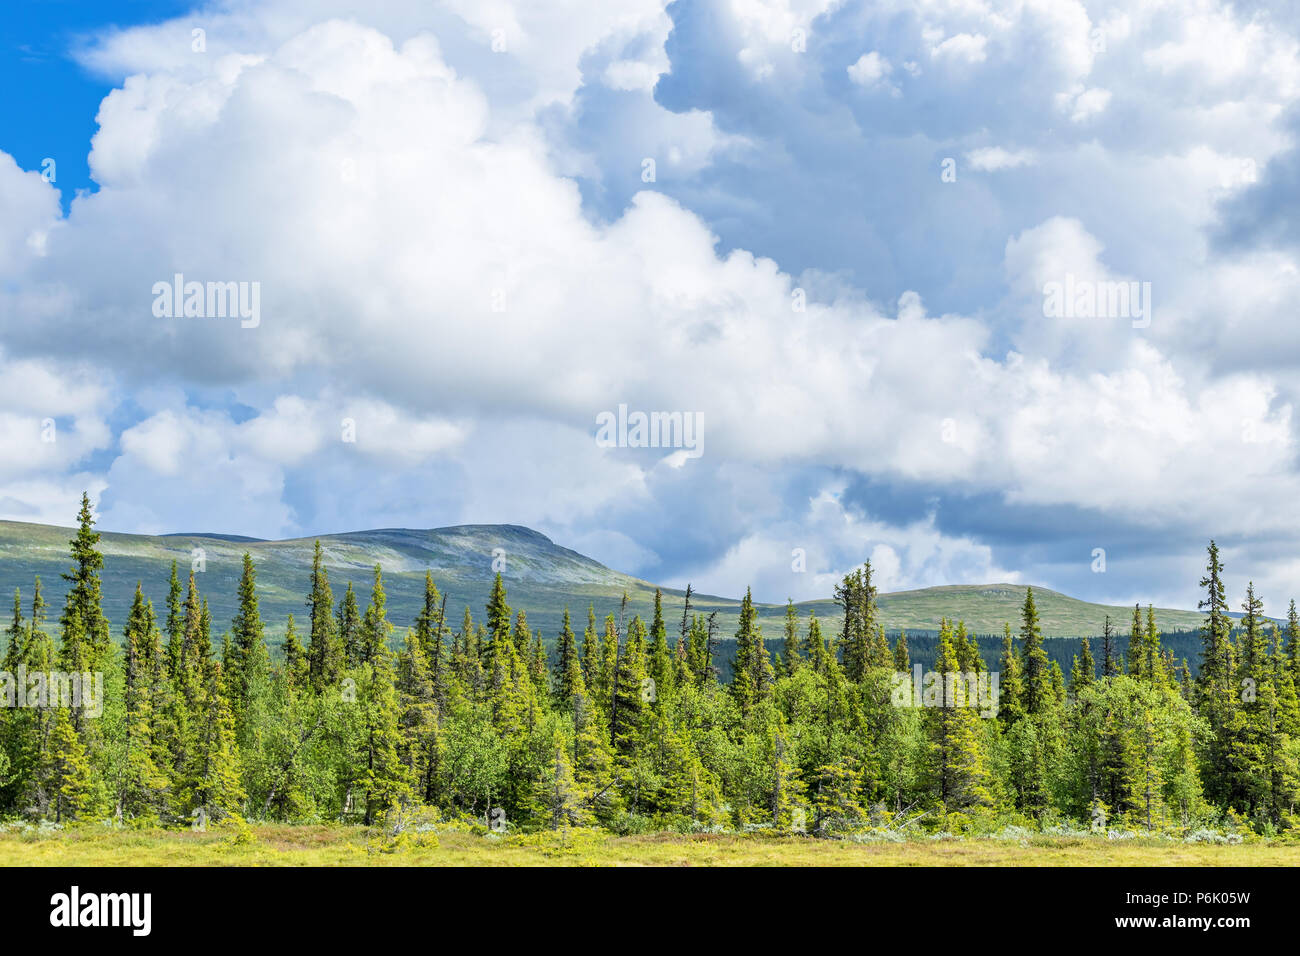 Taiga forest at a mountain in the north Stock Photo